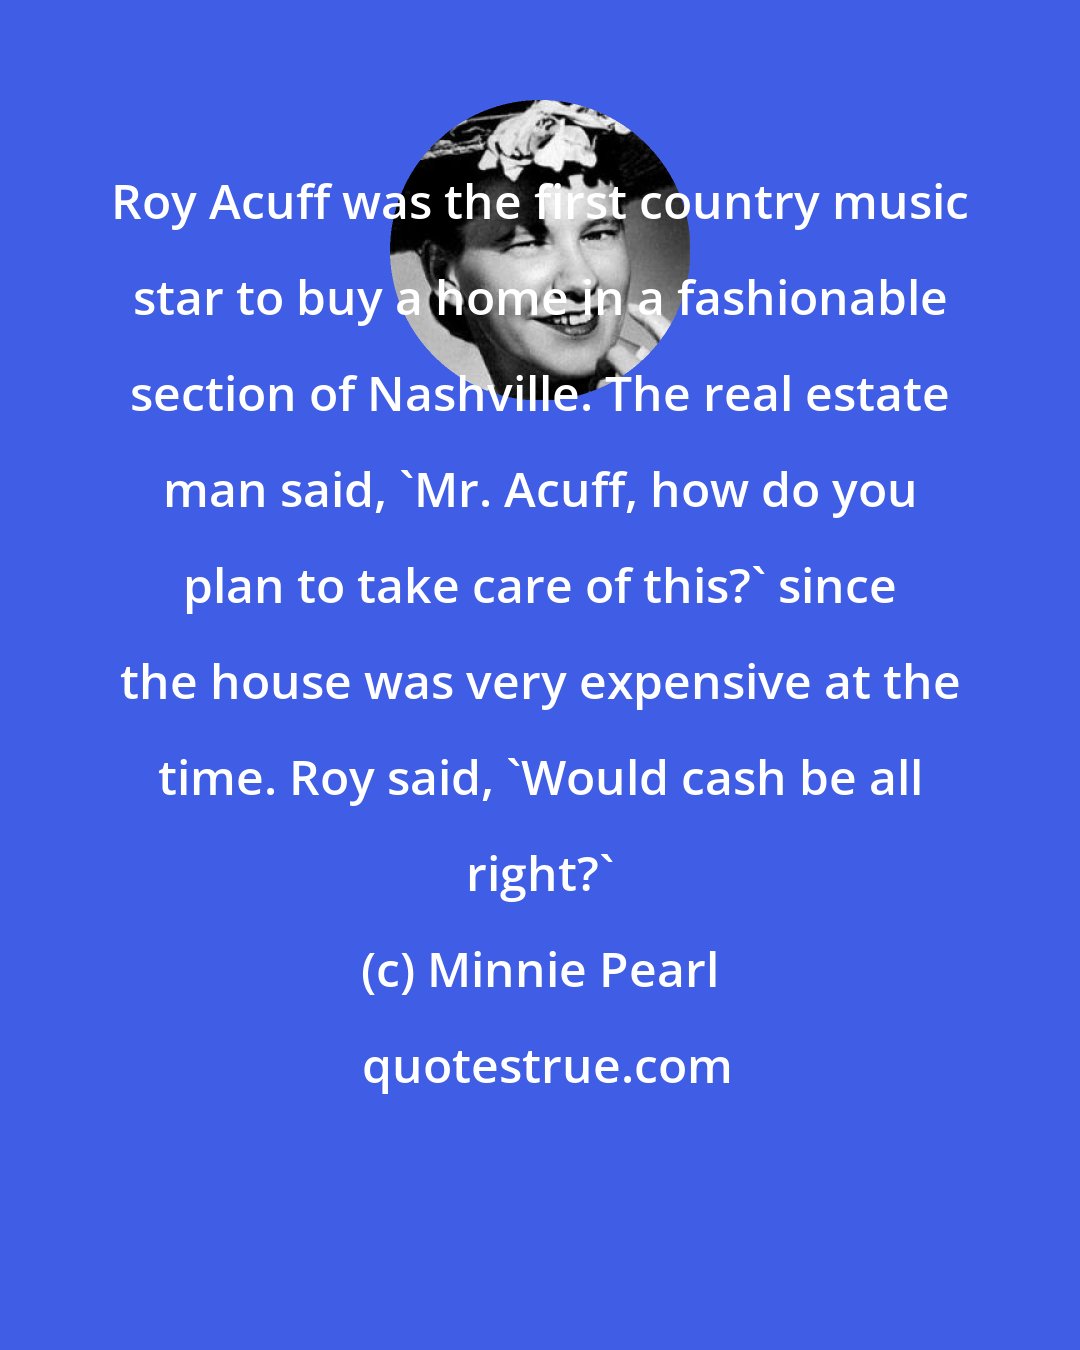 Minnie Pearl: Roy Acuff was the first country music star to buy a home in a fashionable section of Nashville. The real estate man said, 'Mr. Acuff, how do you plan to take care of this?' since the house was very expensive at the time. Roy said, 'Would cash be all right?'